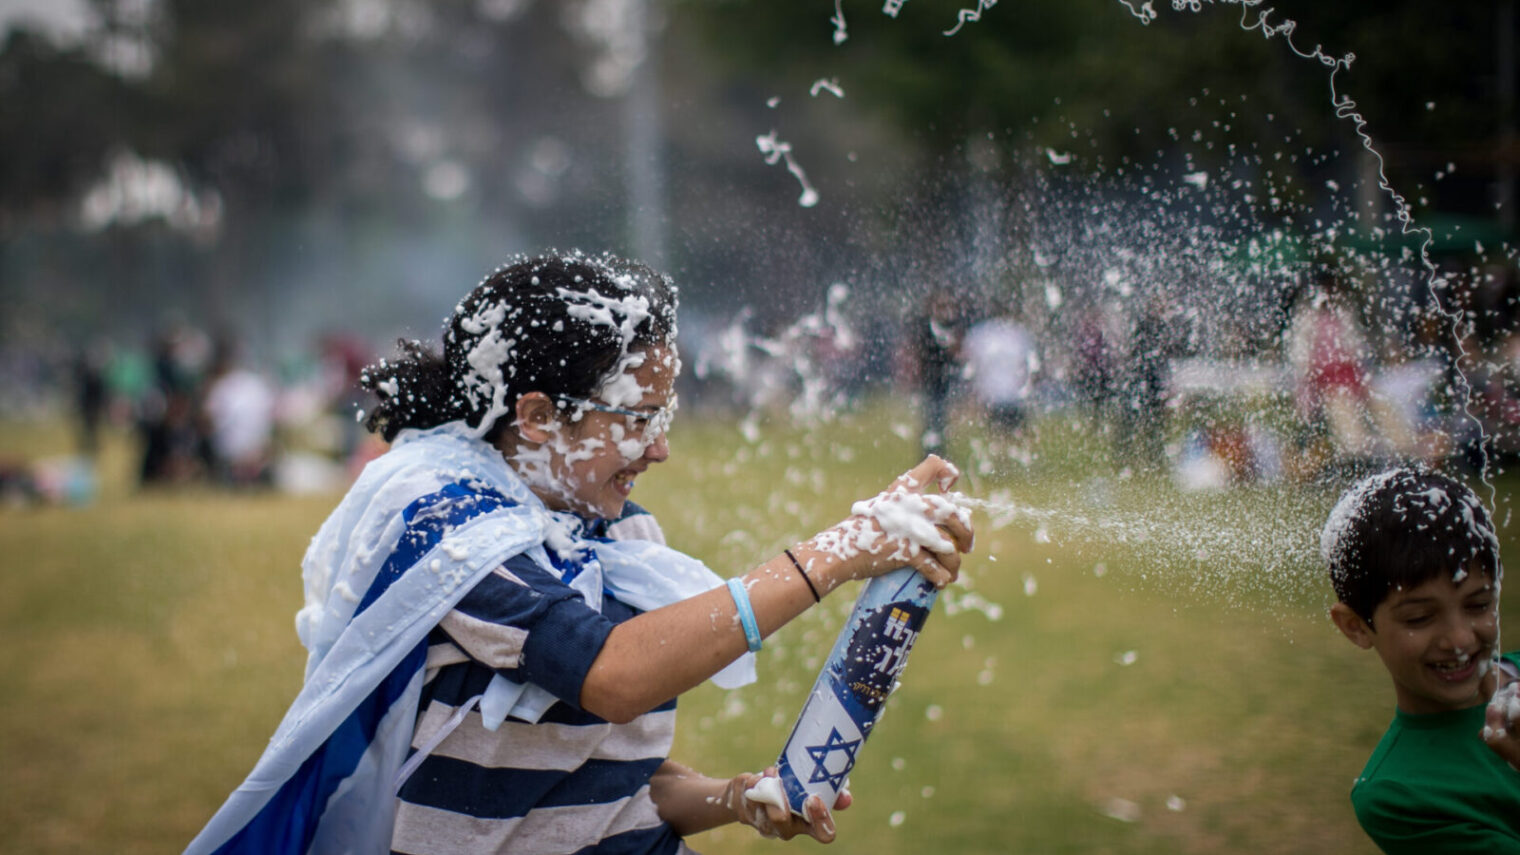 Children go wild with snow spray during Israel's 71st Independence Day celebrations in Sacher Park in Jerusalem, May 9, 2019. Photo by Yonatan Sindel/Flash90